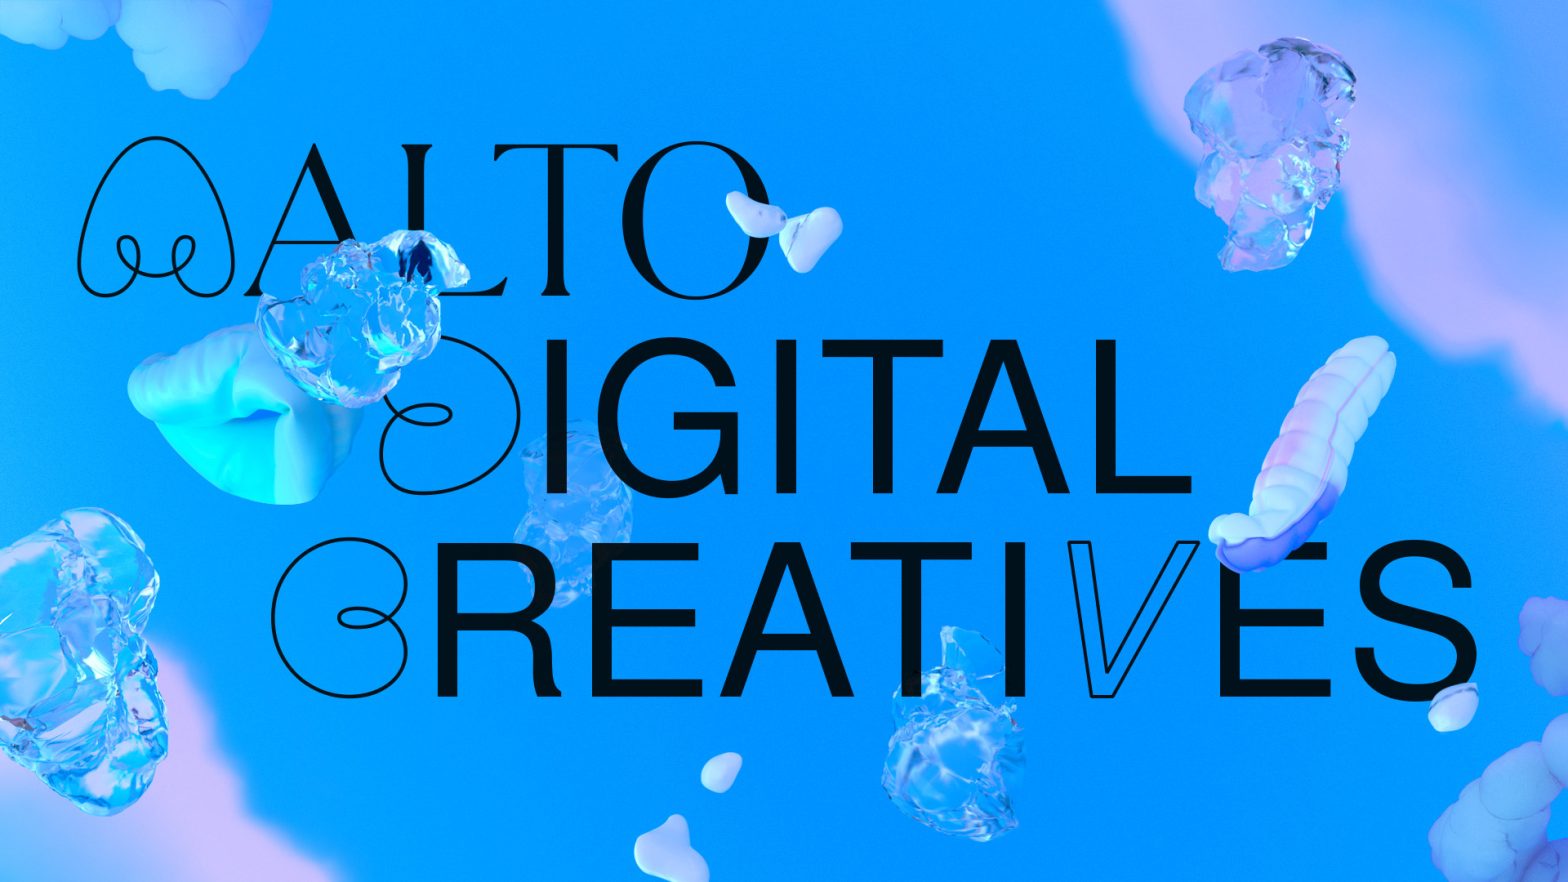 Call for applications: Aalto University’s creative industry pre-incubator programme is looking for participants